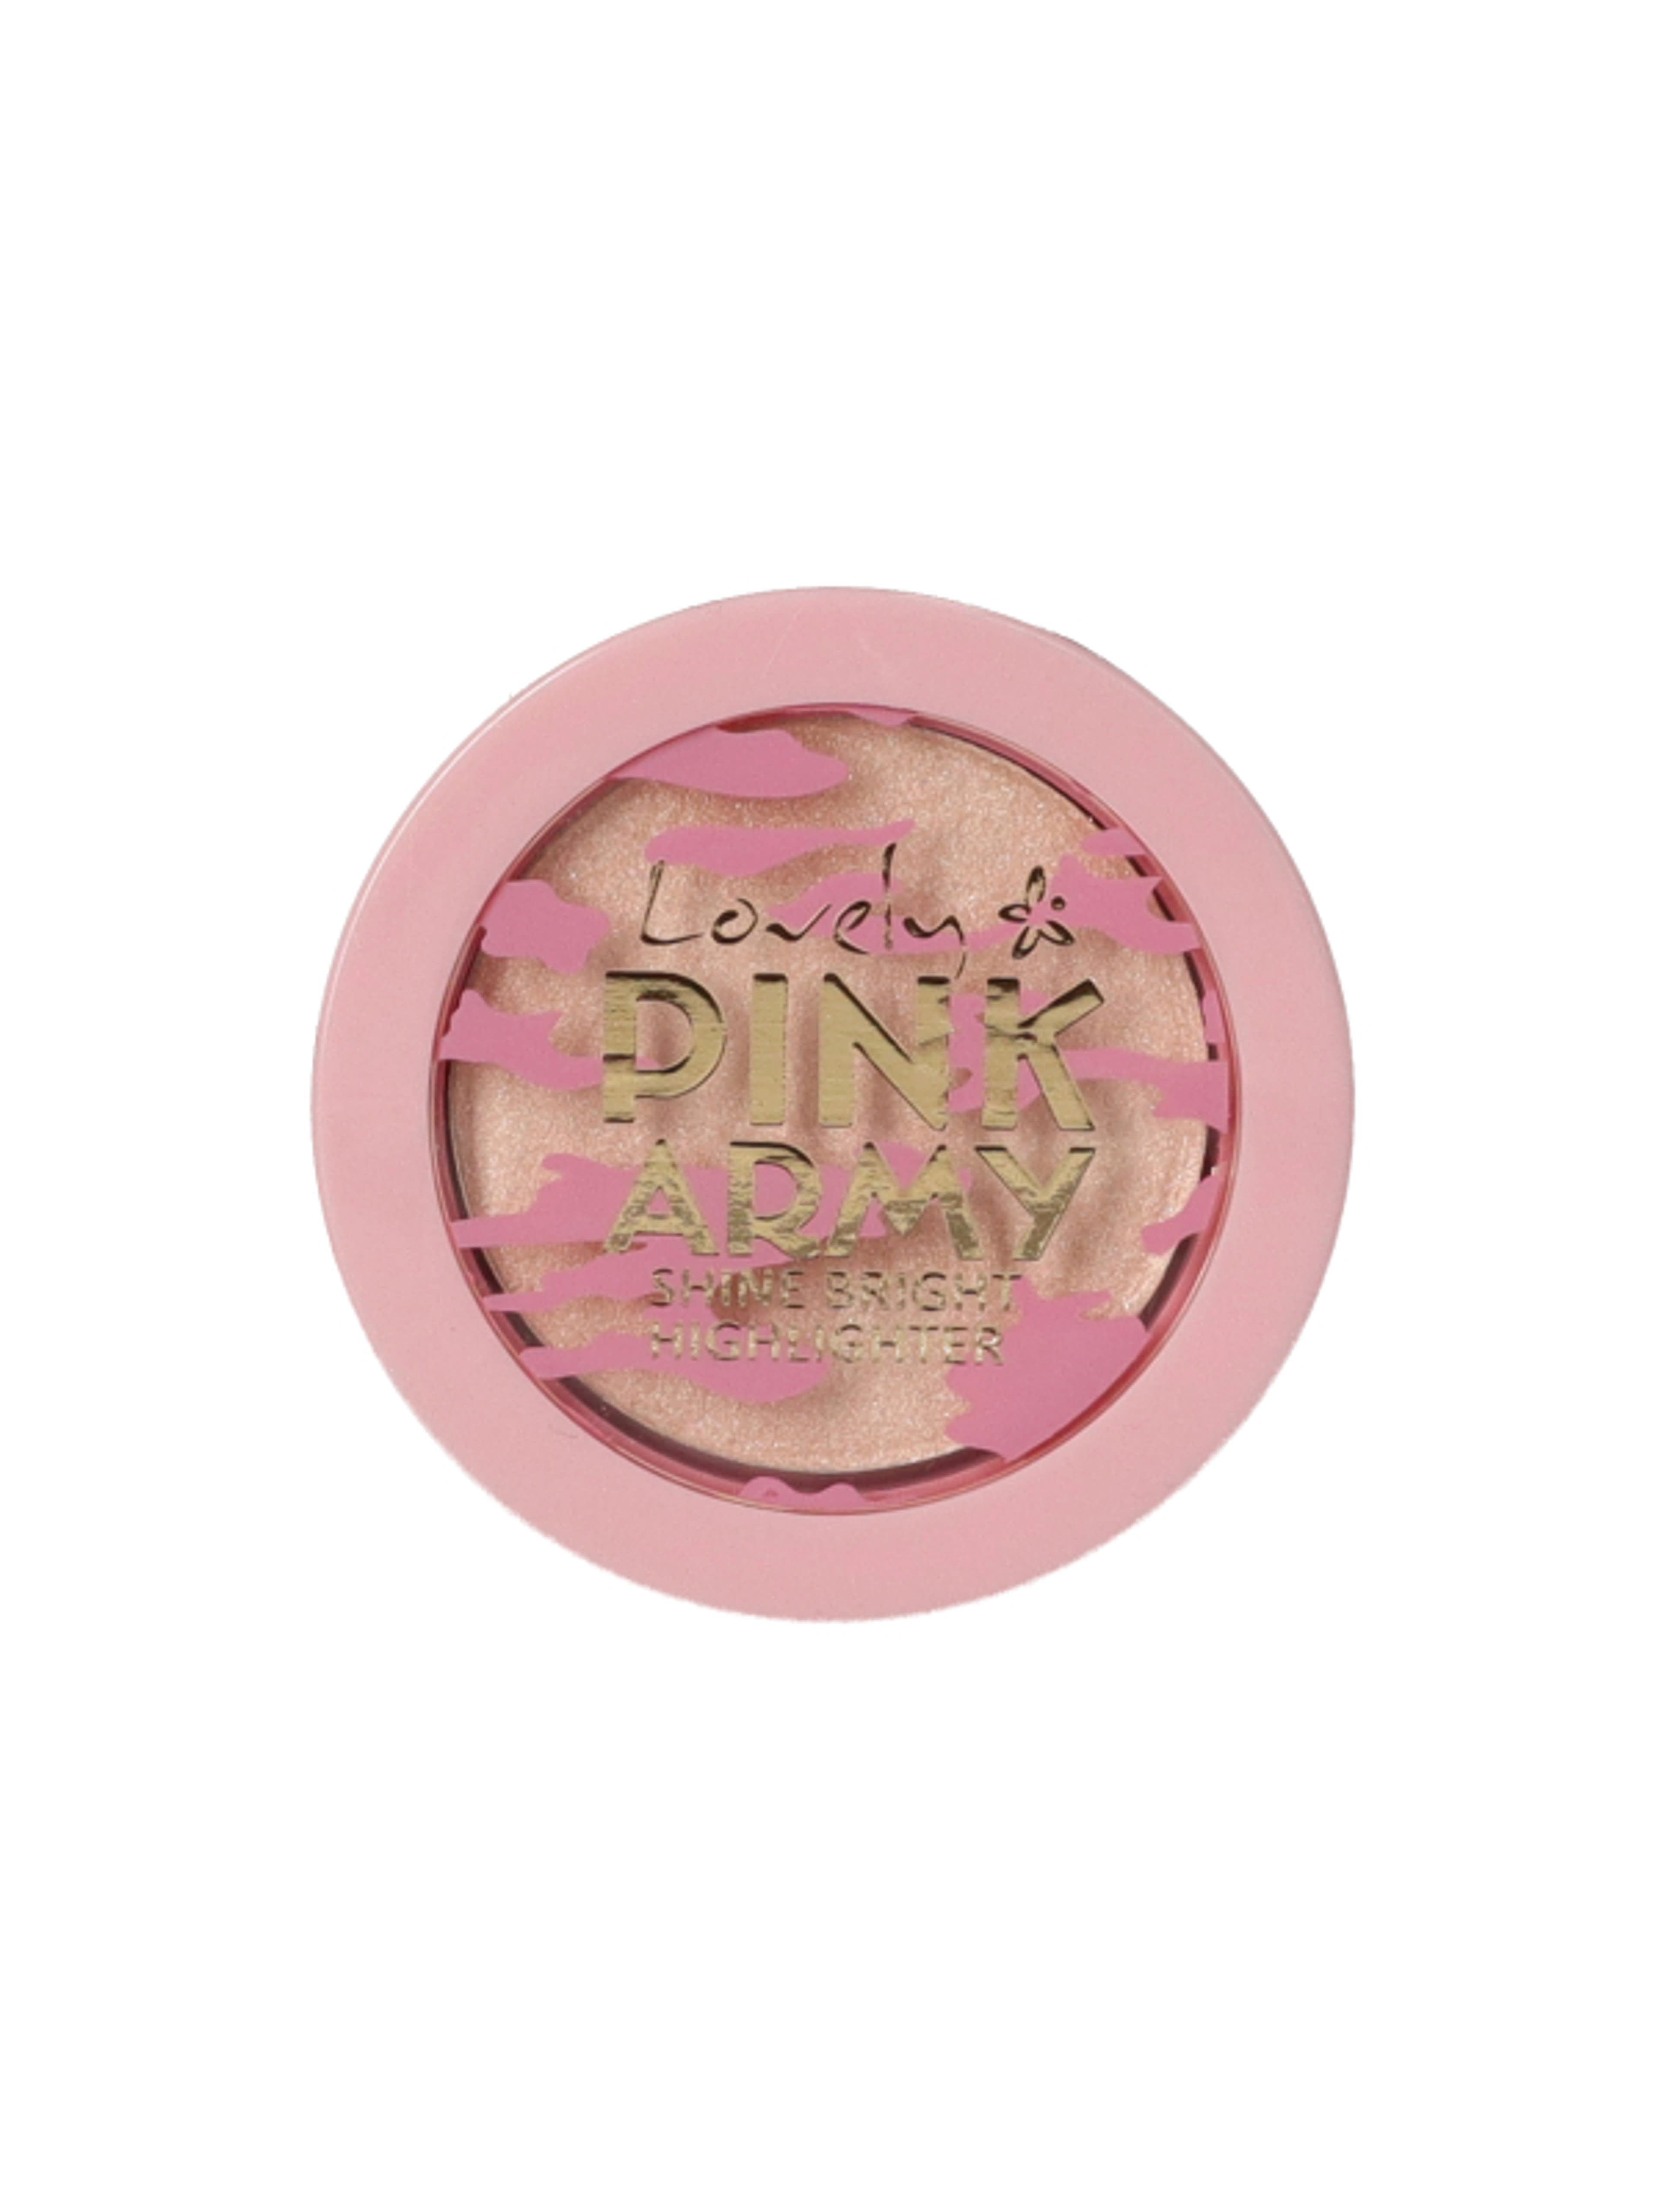 Lovely Shine Bright Pink Army highlighter - 1 db